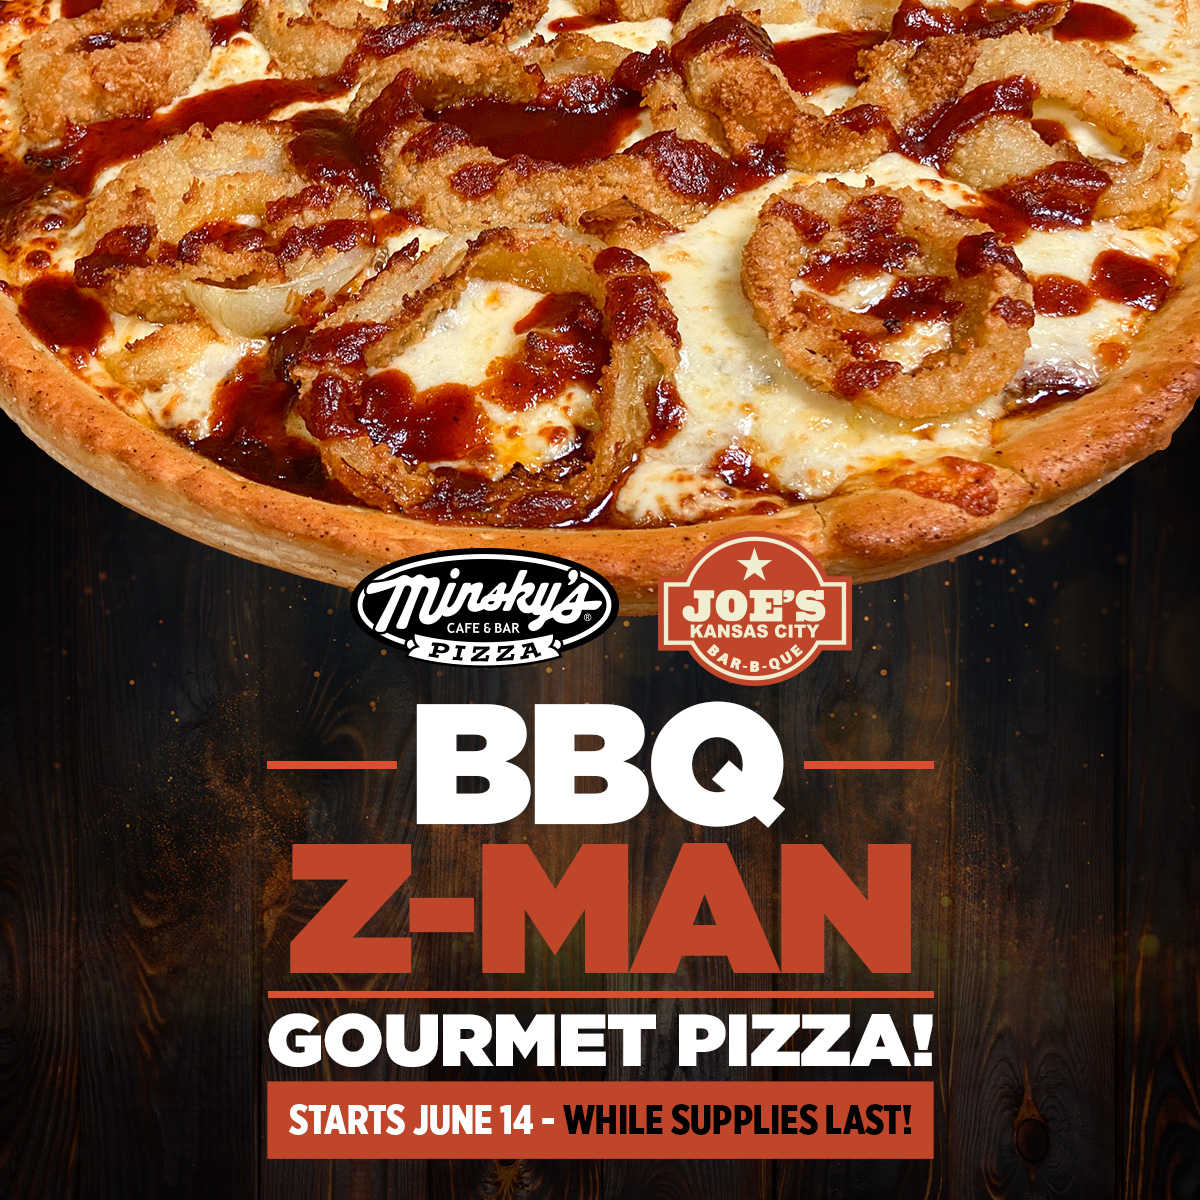 Minsky's + Joe's Z-Man Pizza – Just In Time For Father's Day